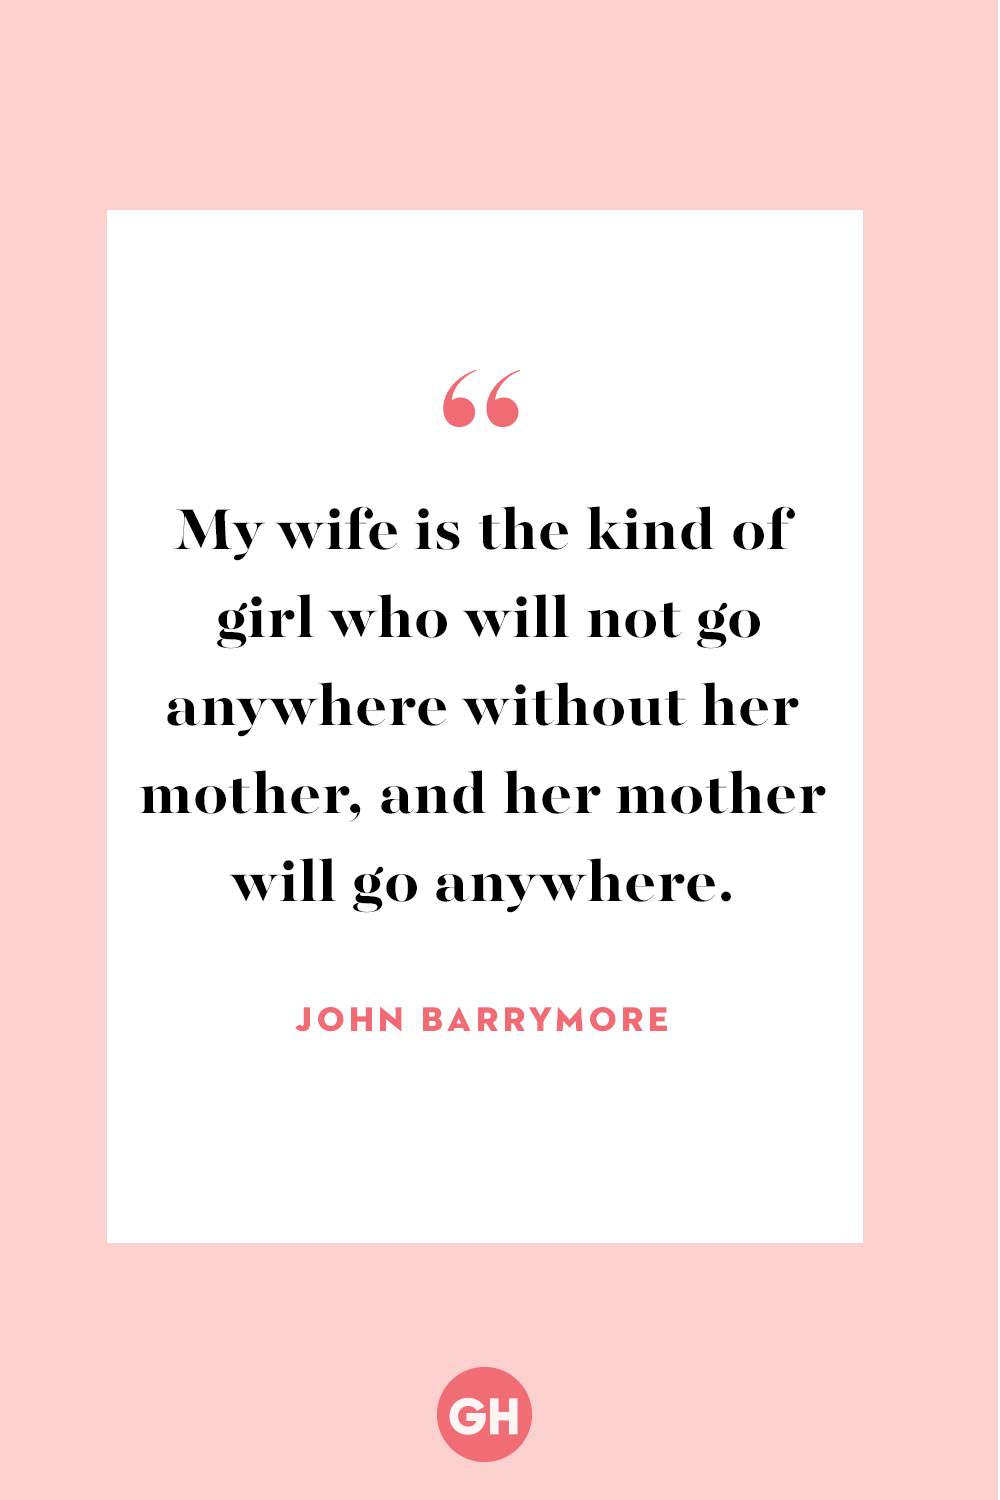 20 Best Mother-in-Law Quotes